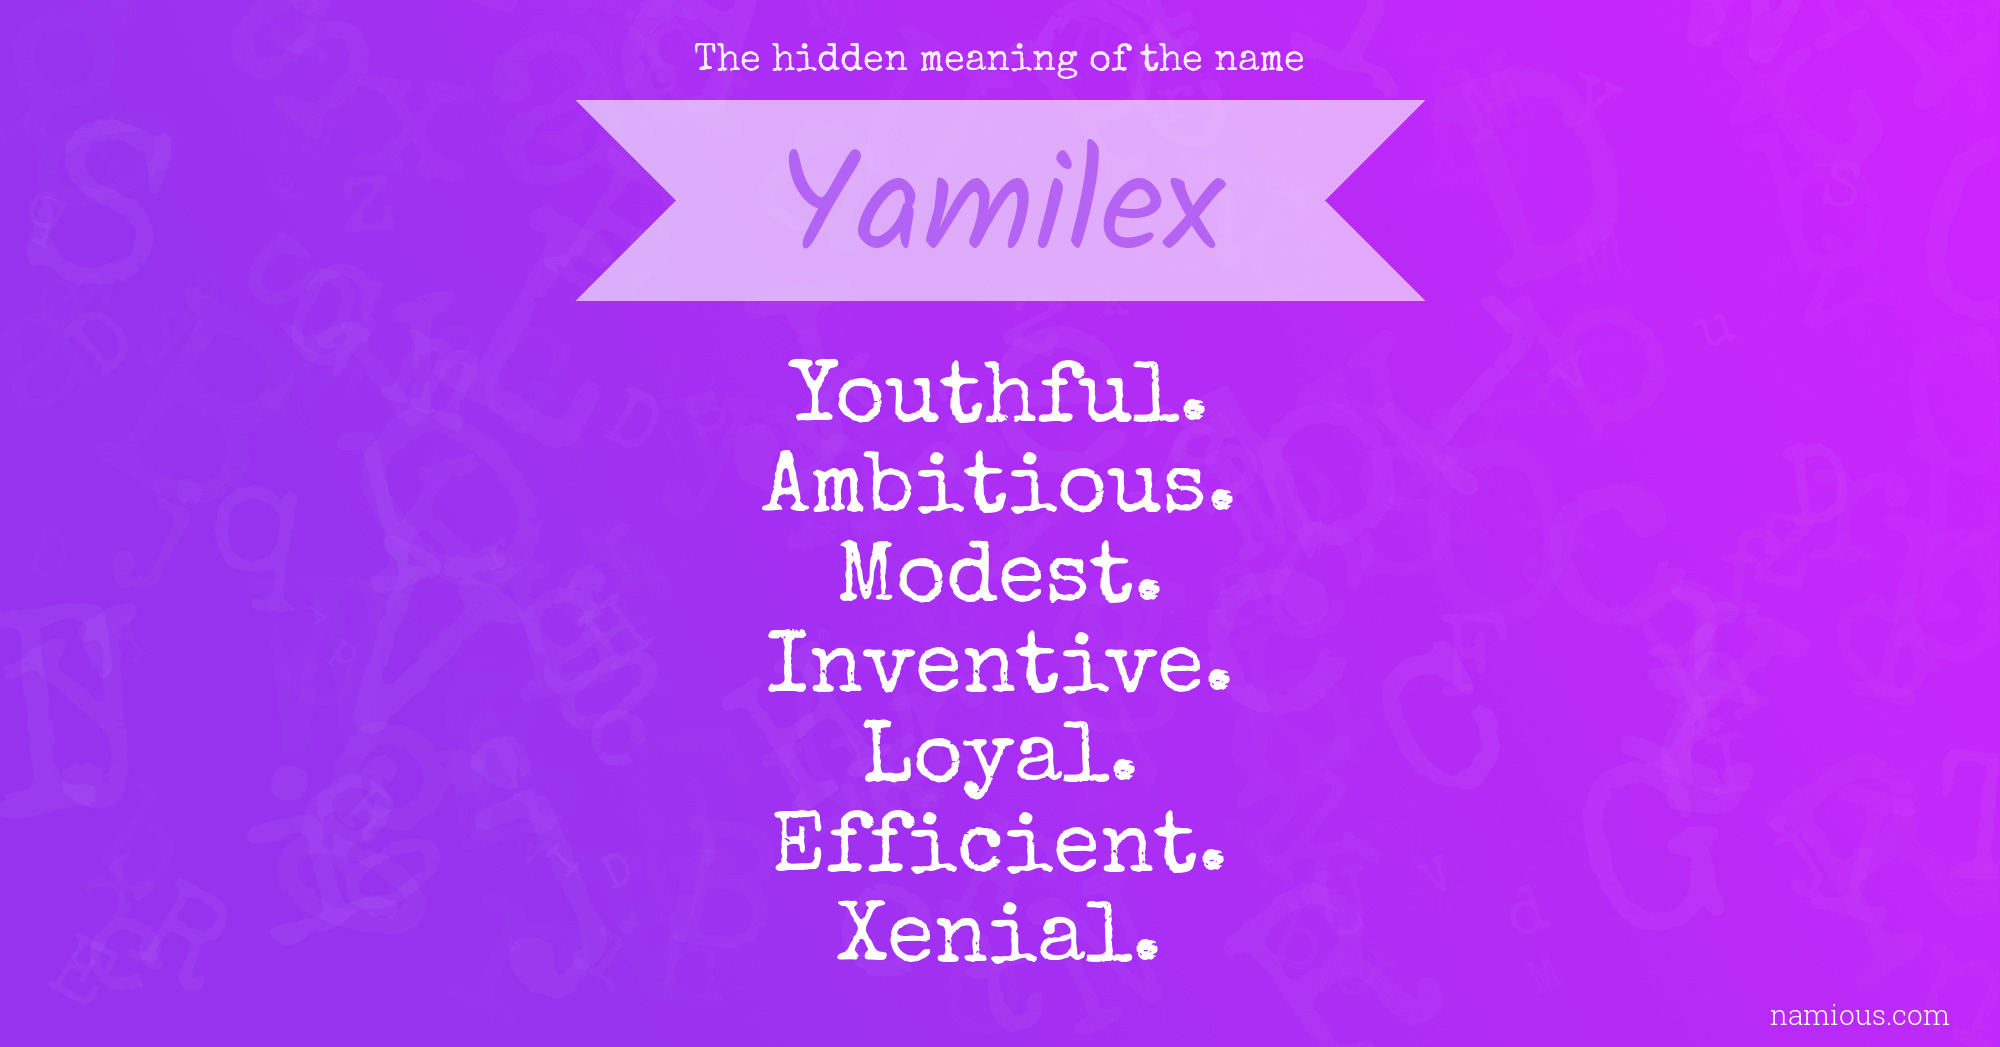 The hidden meaning of the name Yamilex